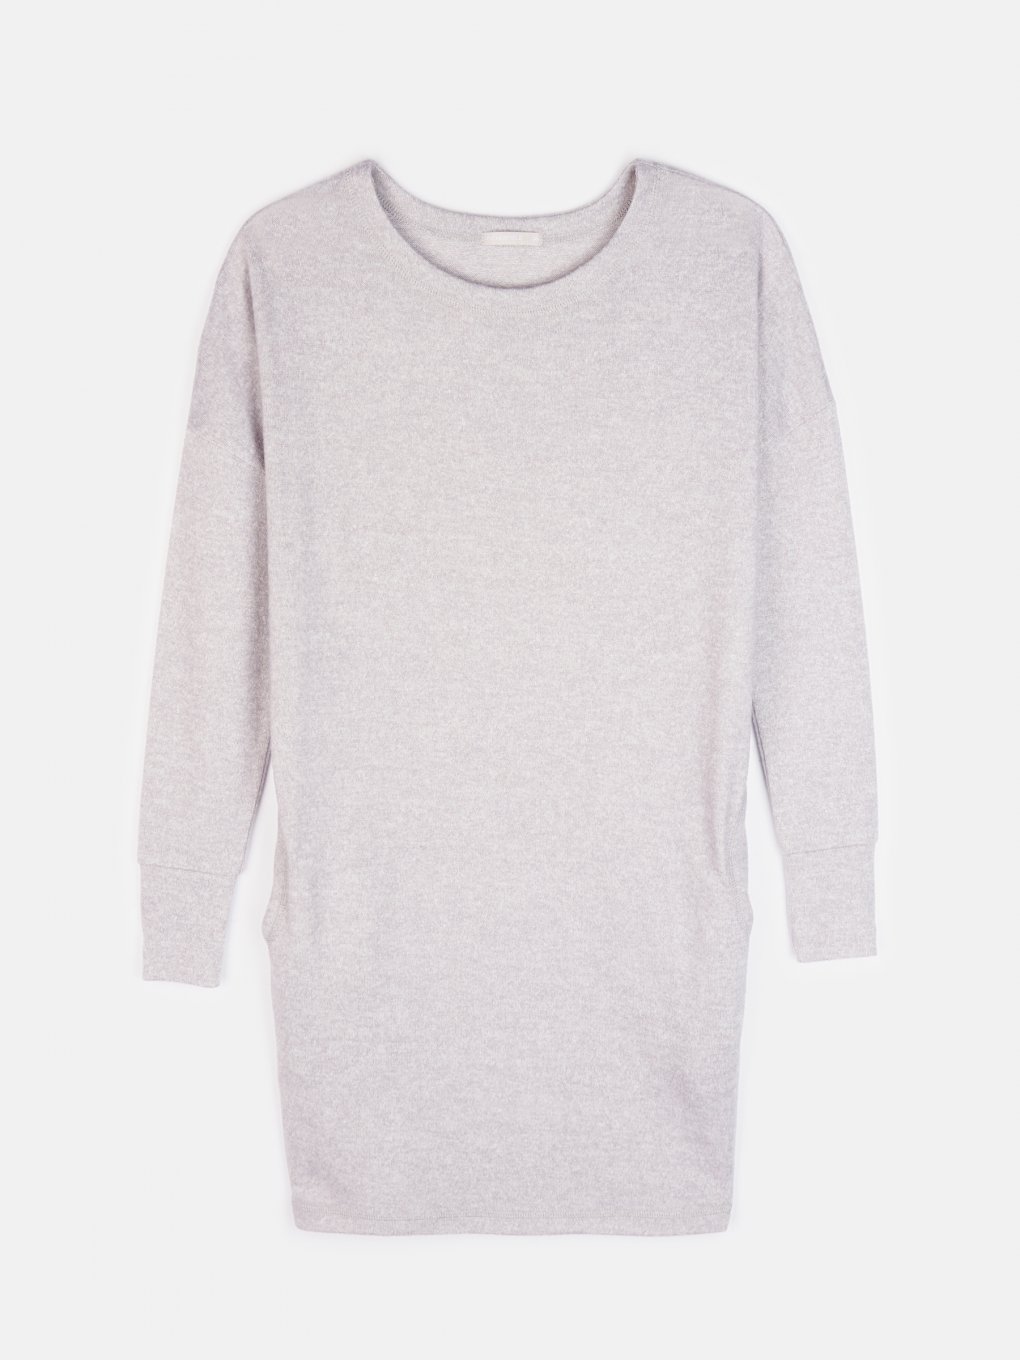 Longline jumper with pockets